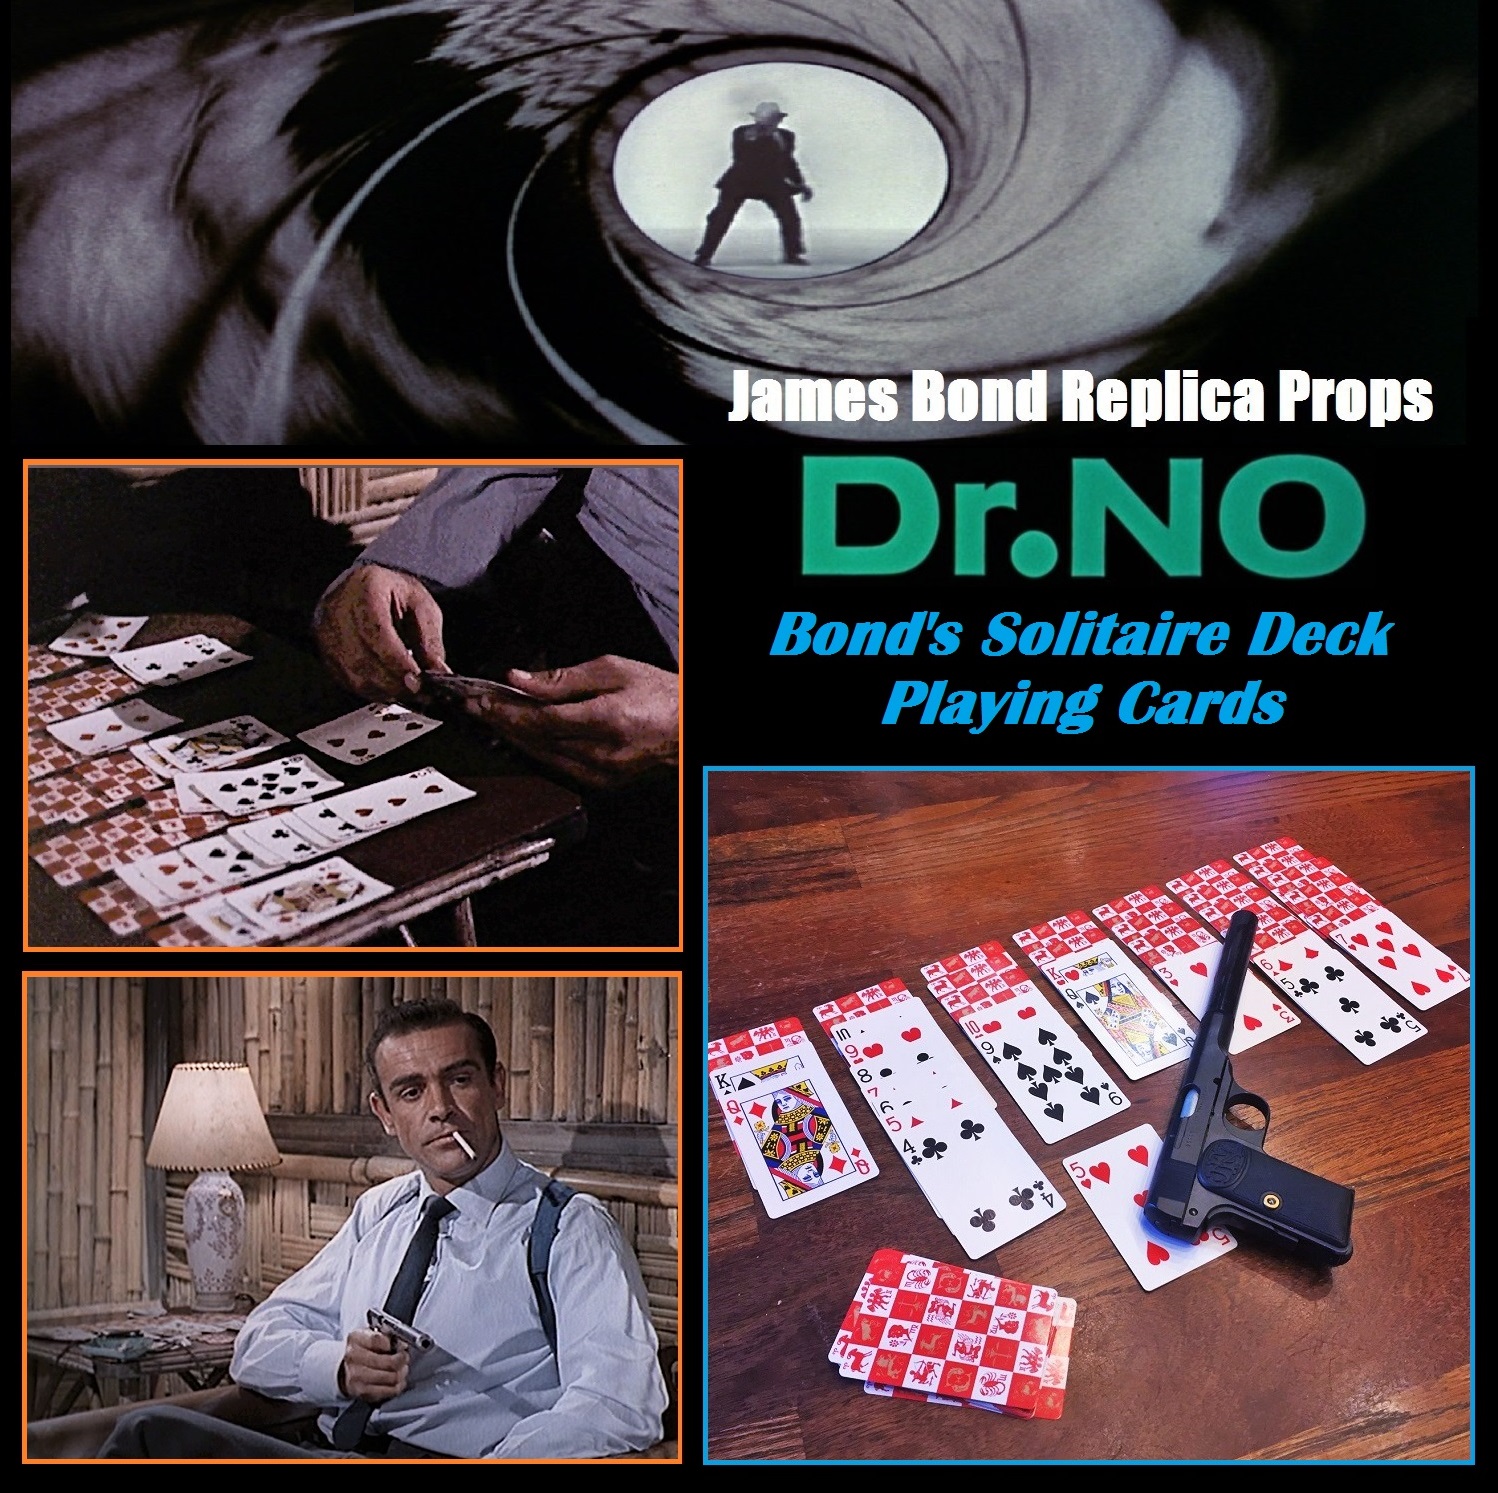 A 007-DN_Playing Cards-Rep (1).jpg